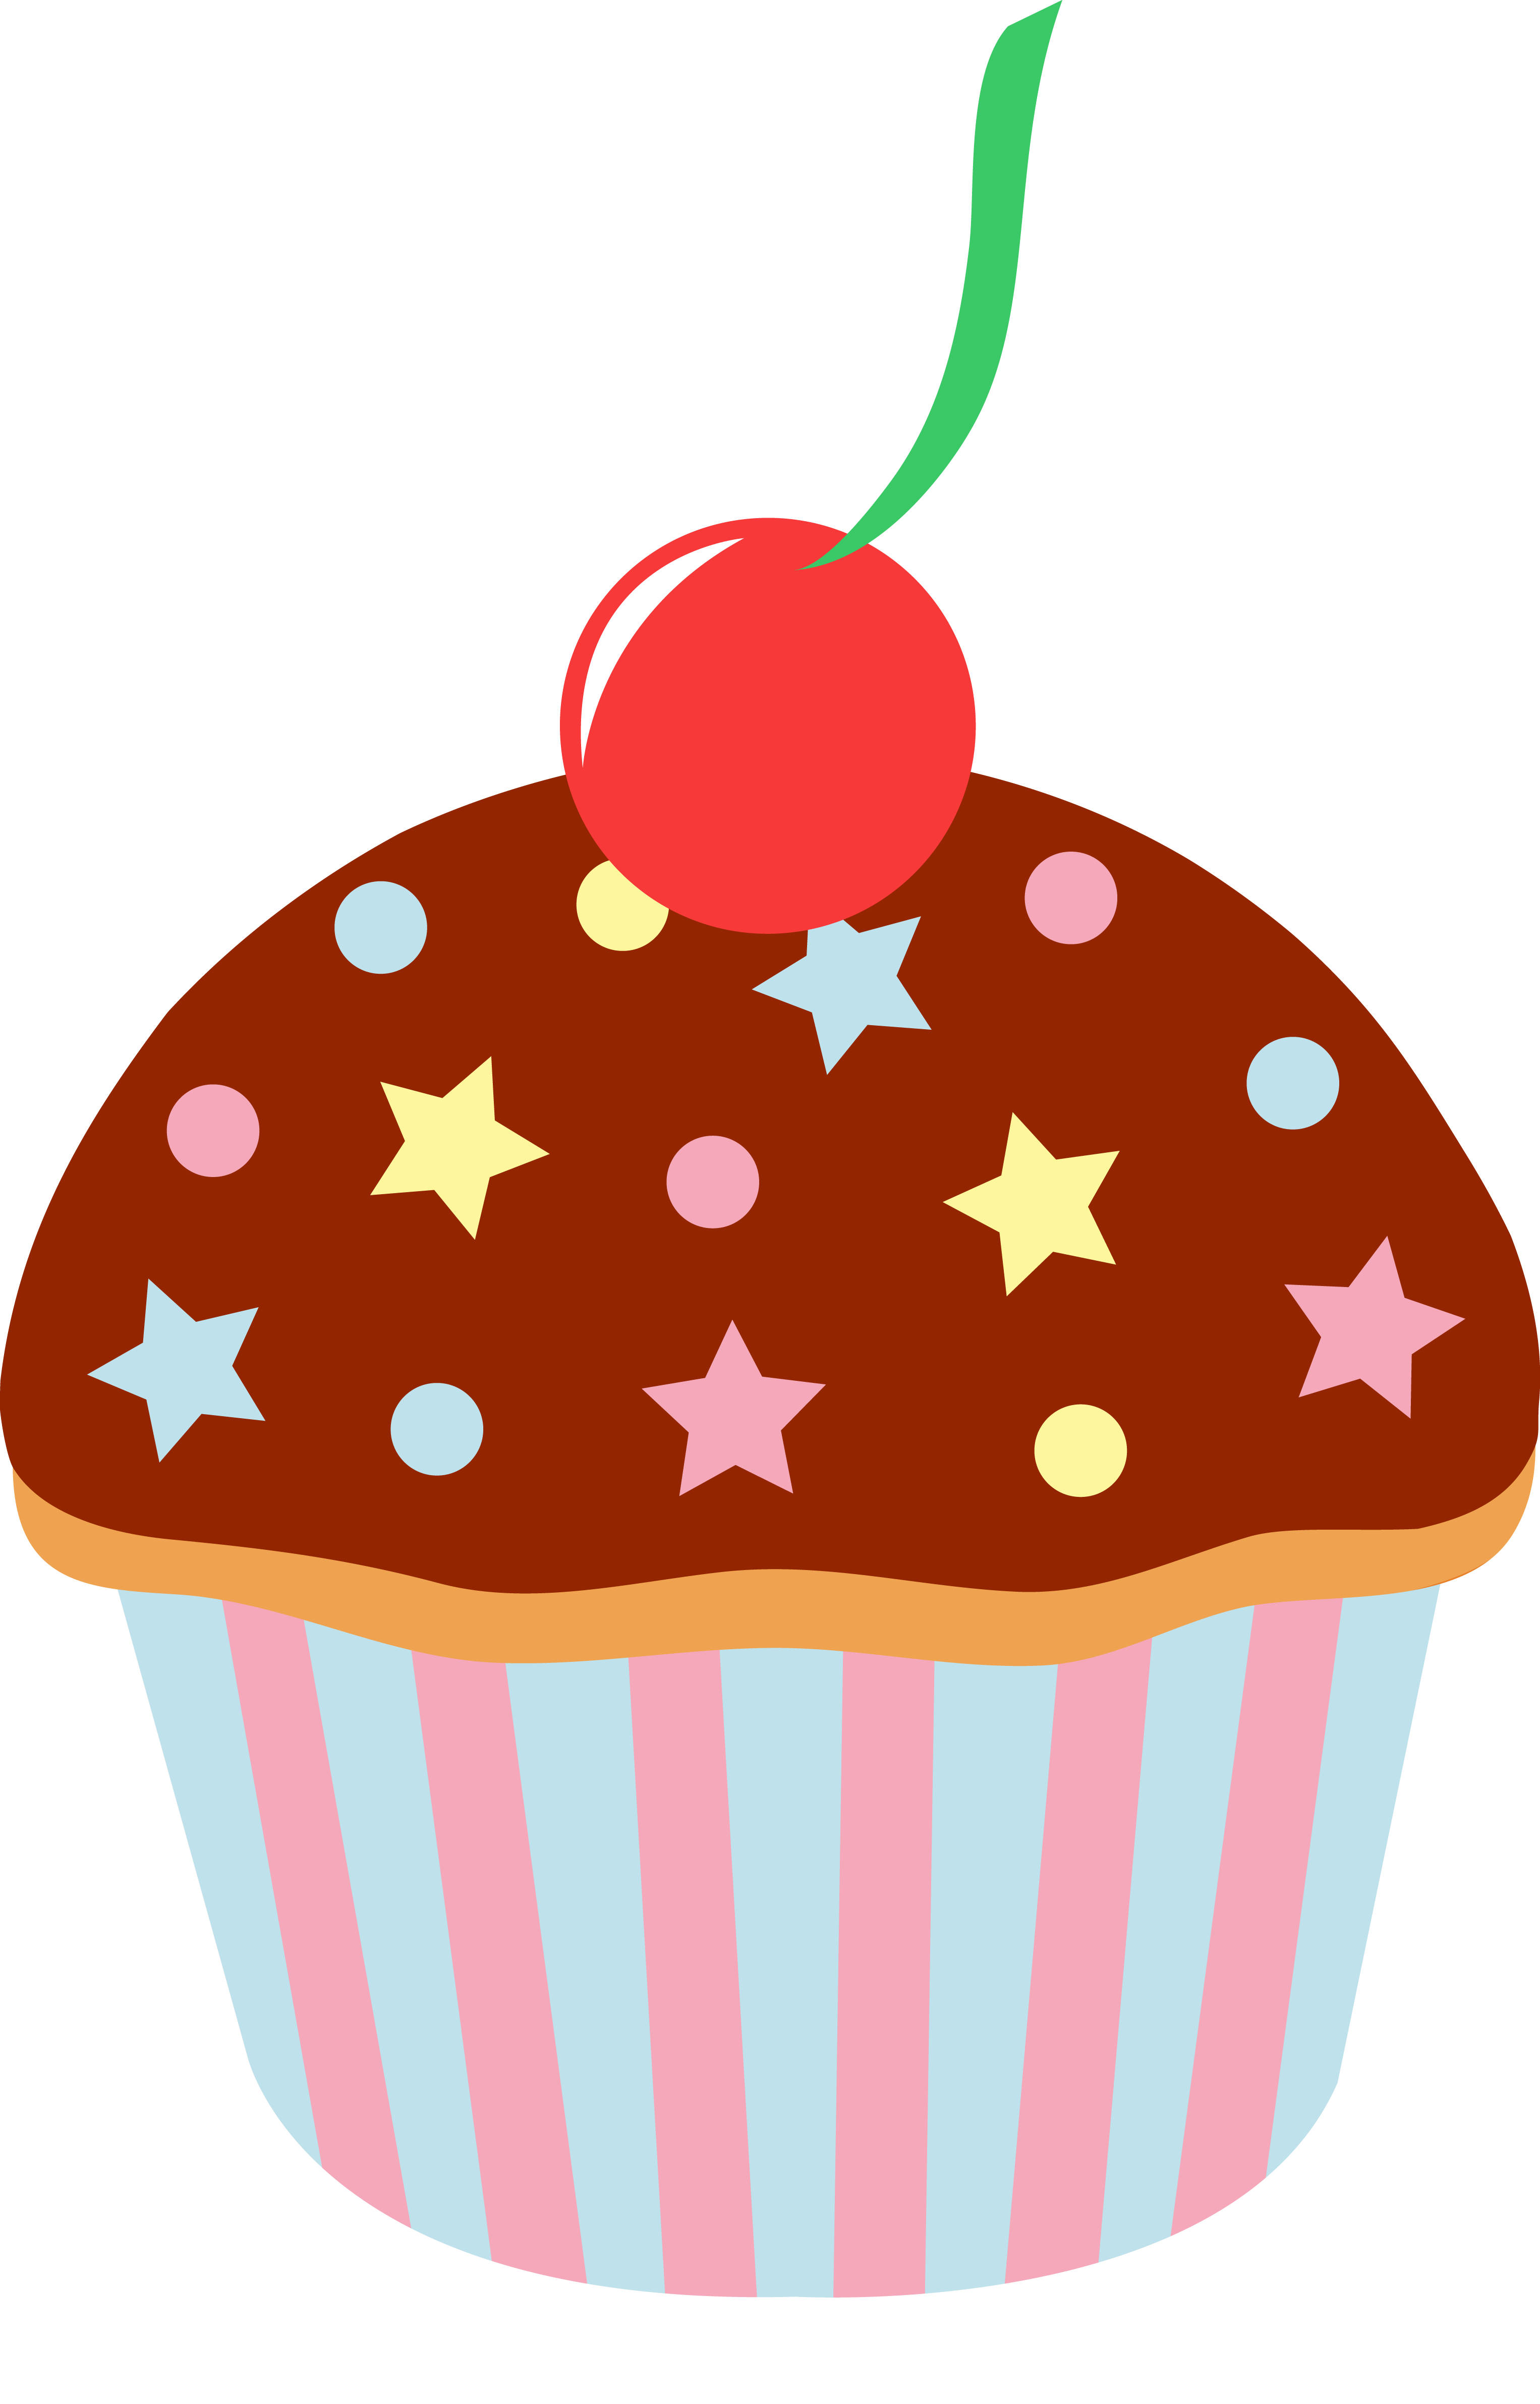 cupcake clipart free download - photo #23